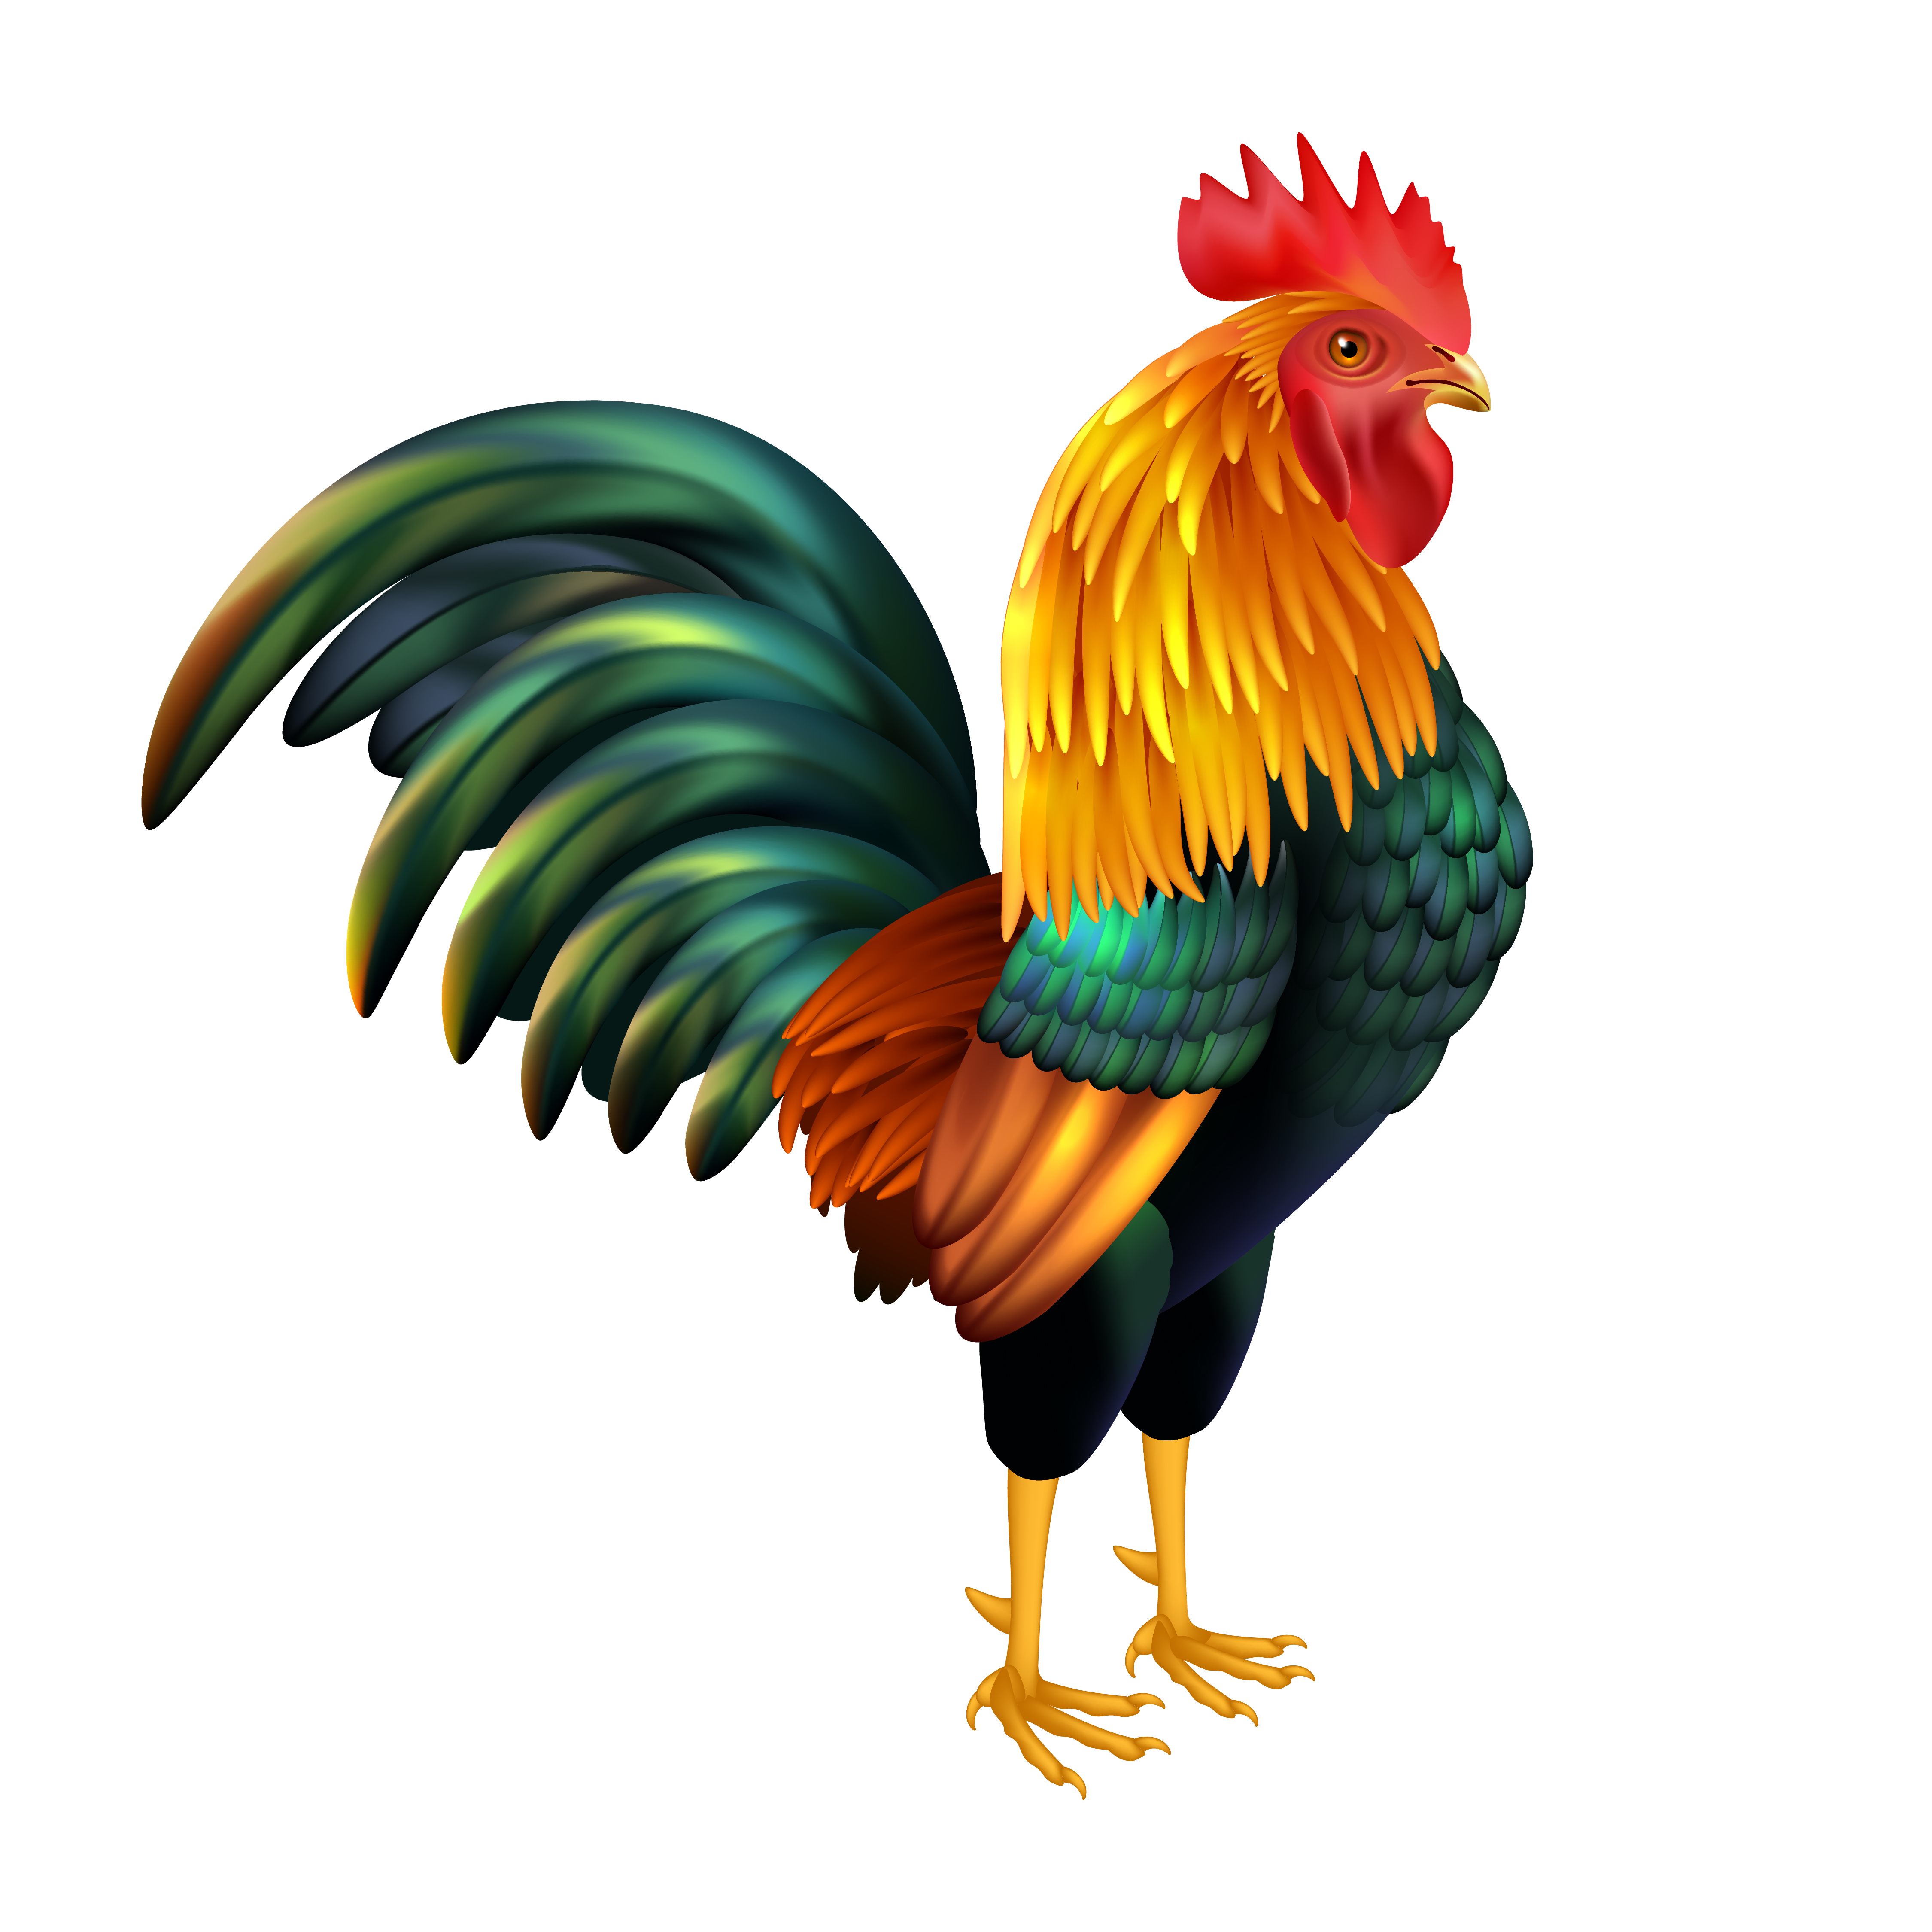 Download Colorful Realistic Rooster - Download Free Vectors ...